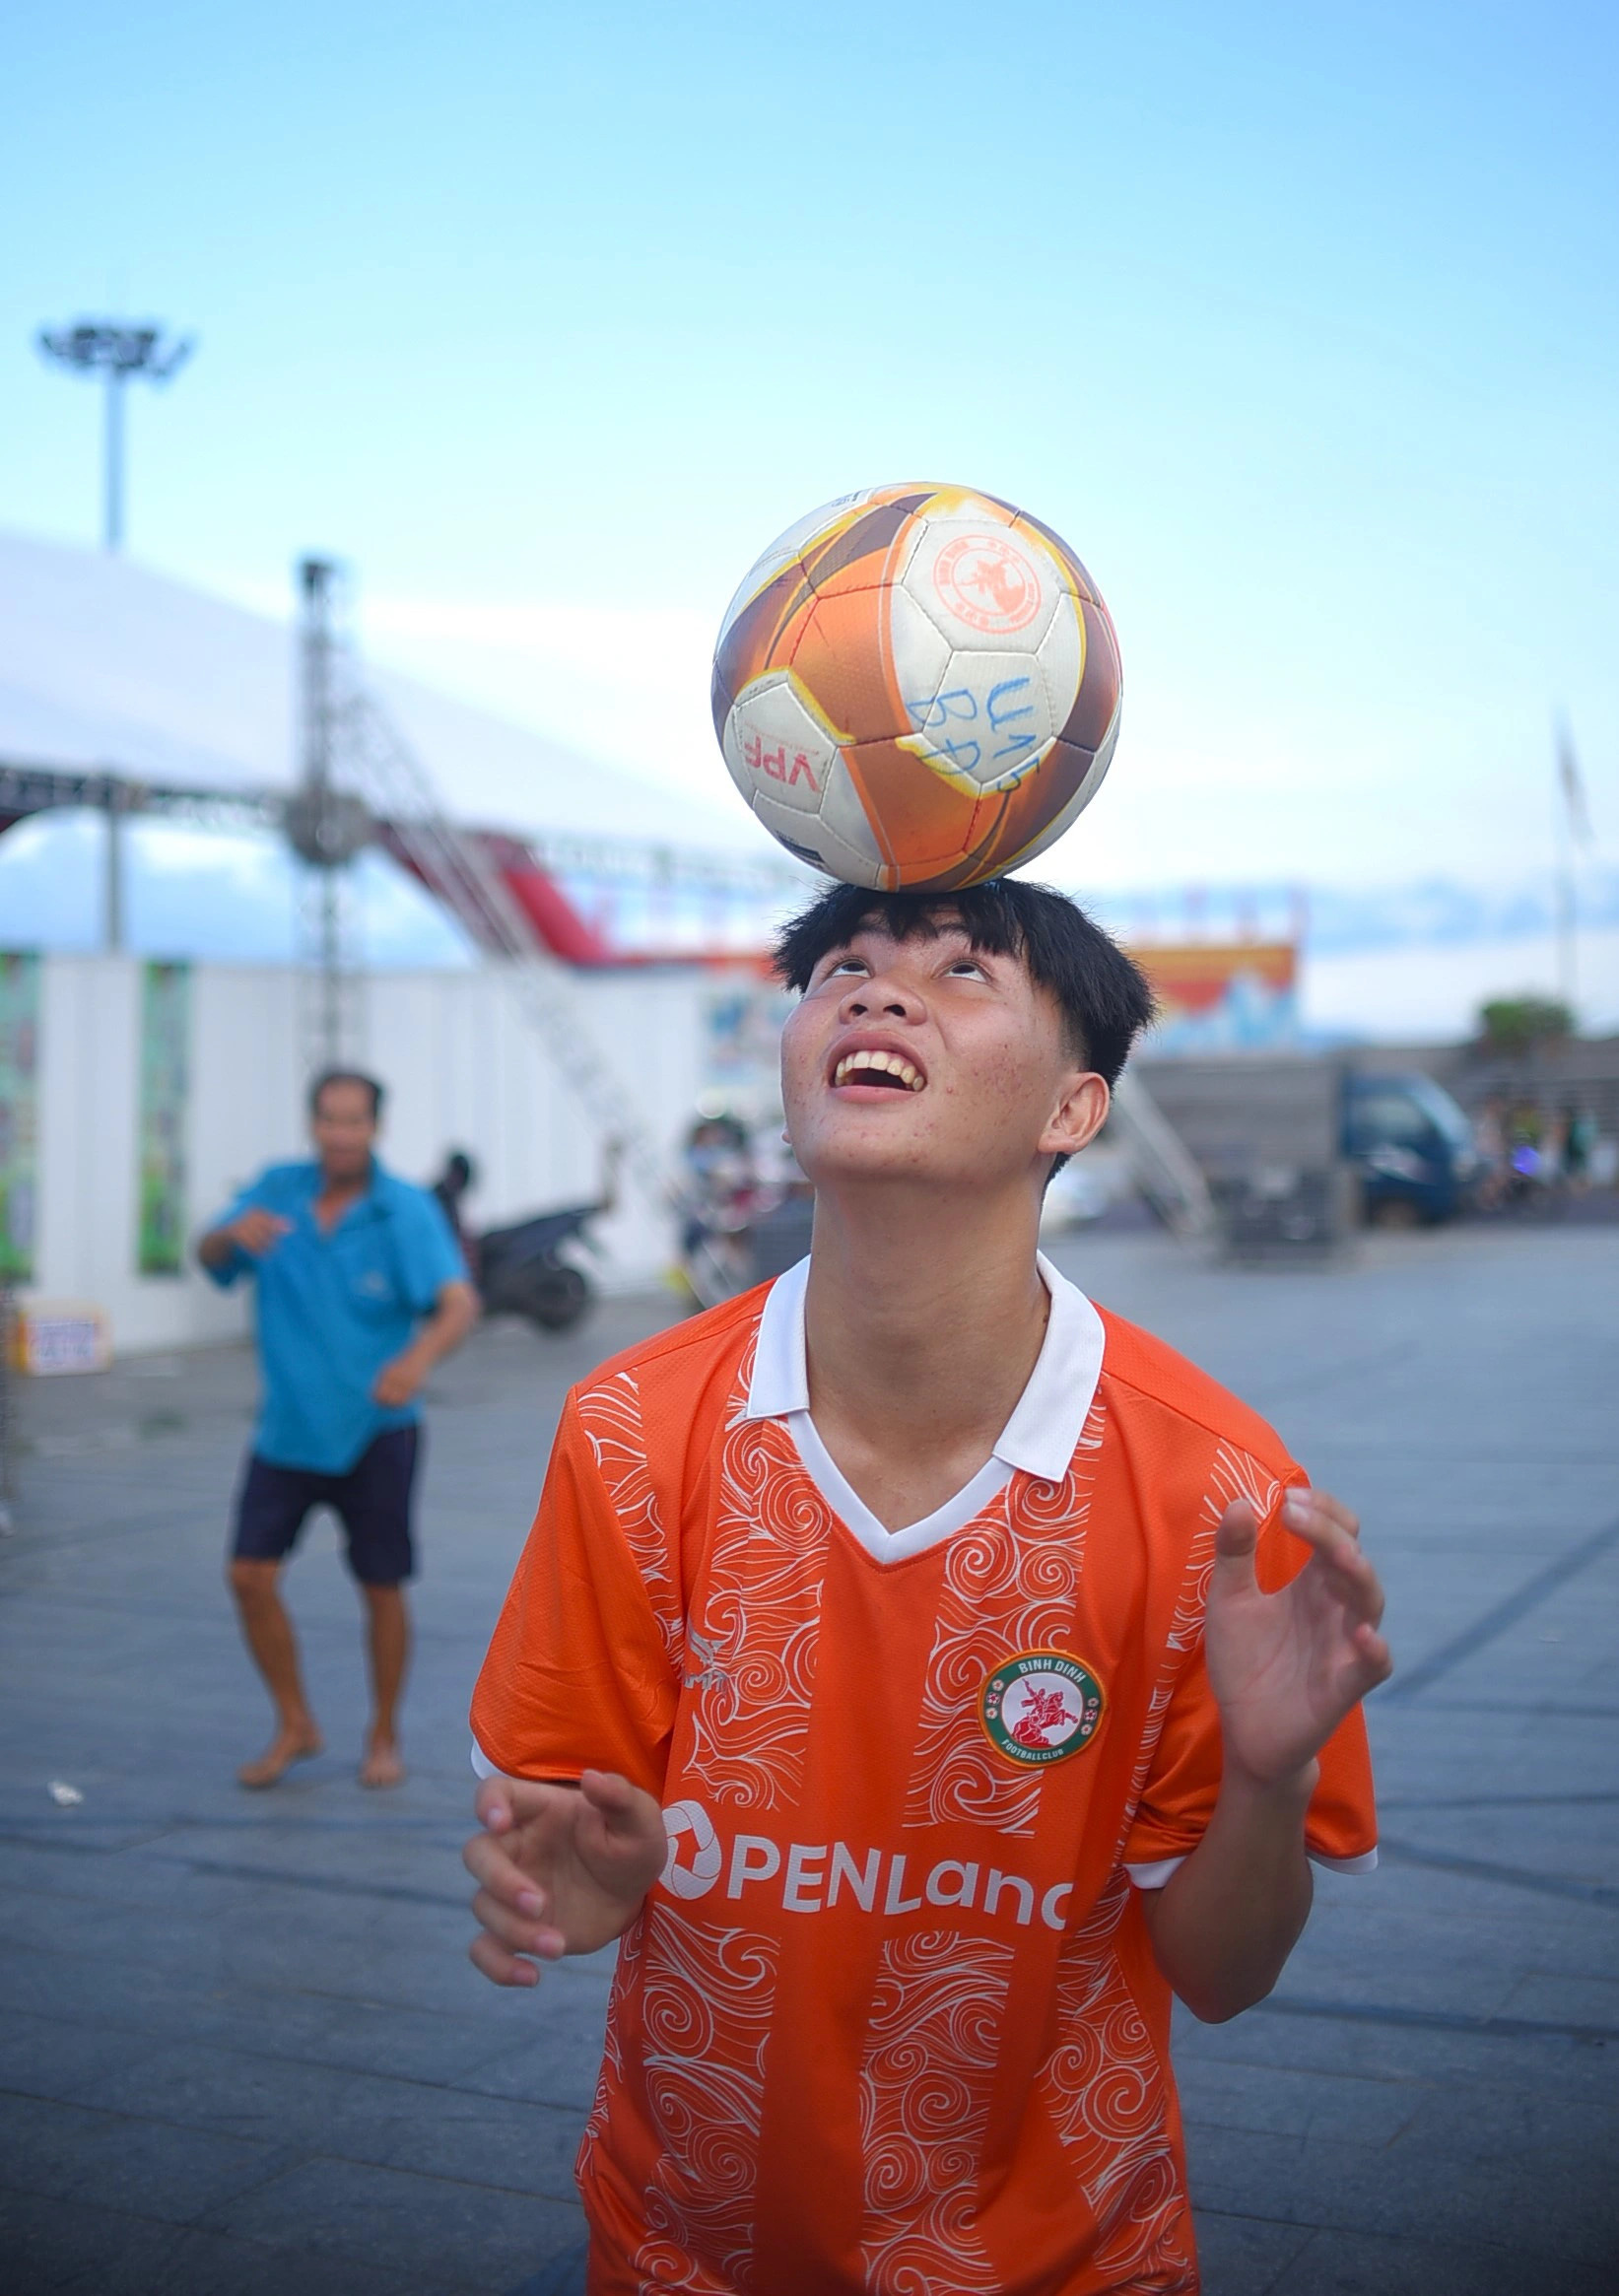 Teqball requires players to have good ball control skills. Photo: Lam Thien / Tuoi Tre